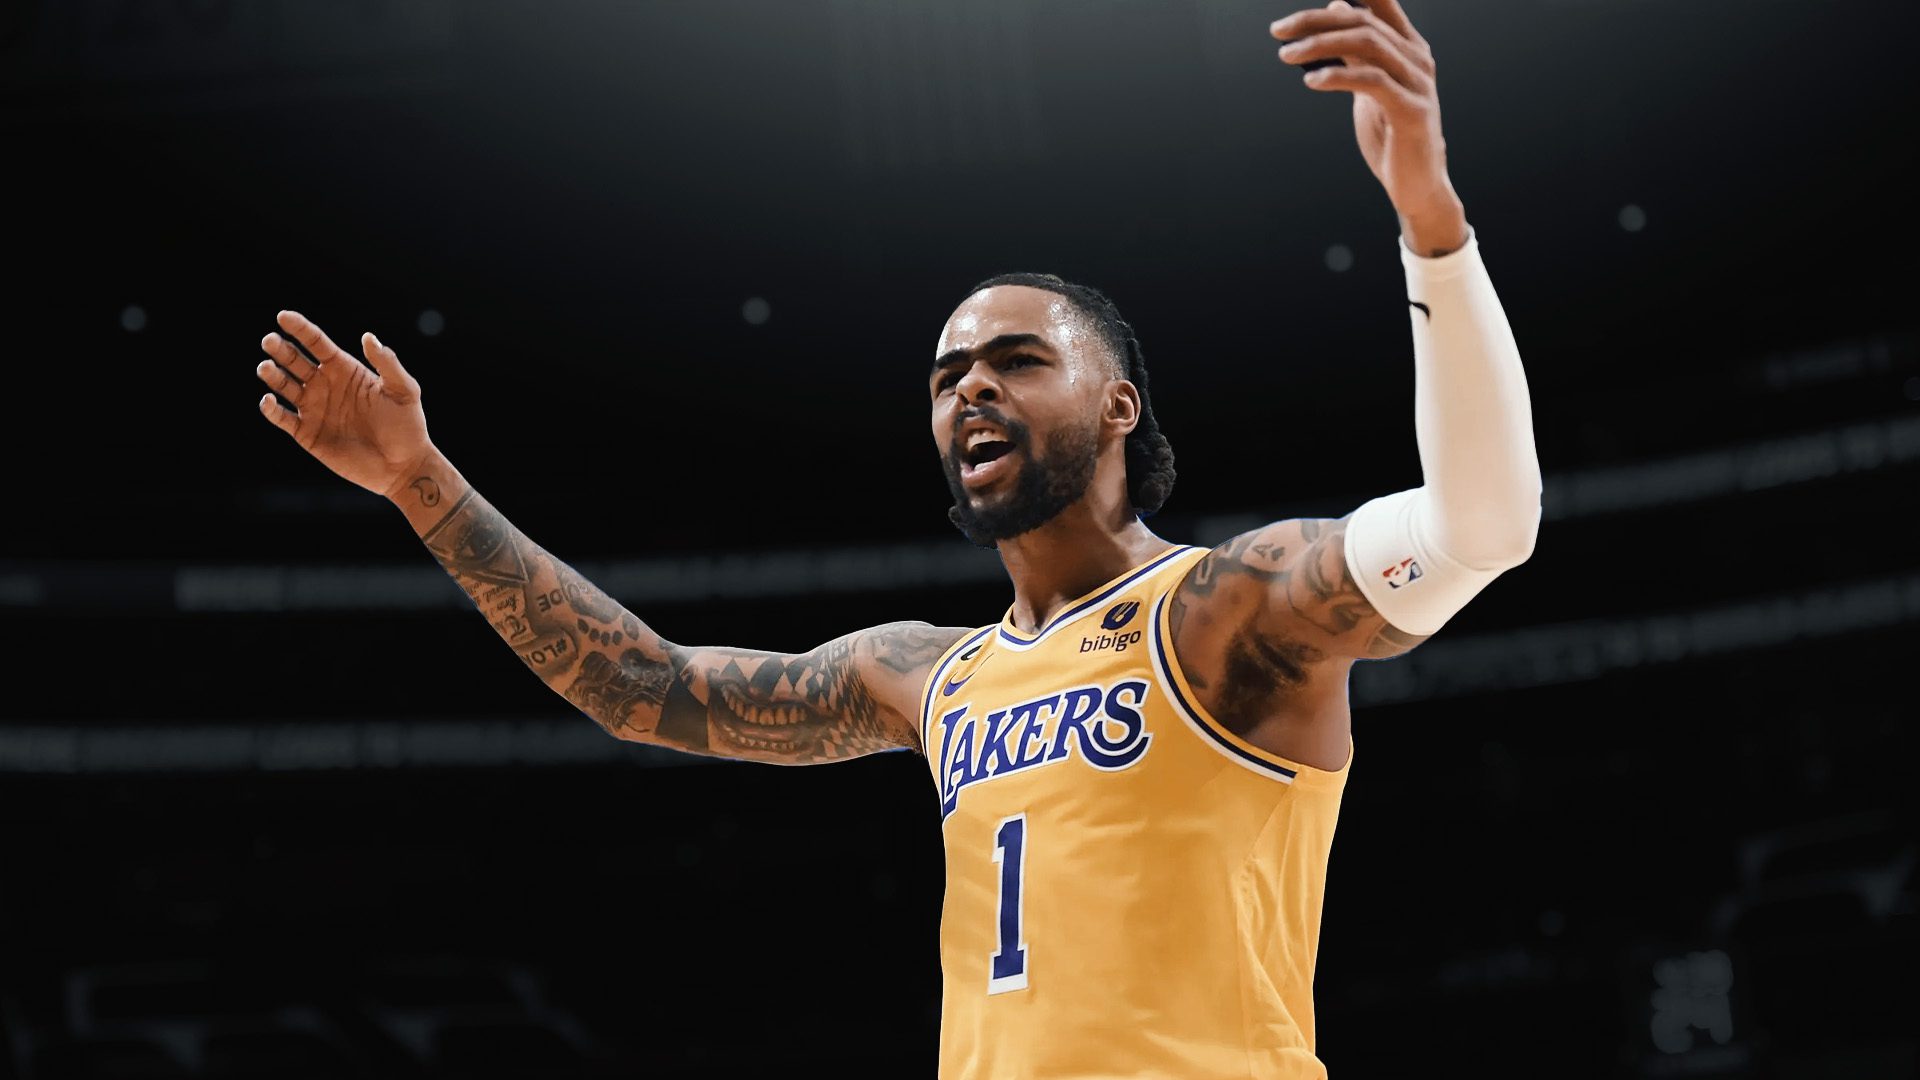 Lakers Fear They Could Lose D’Angelo Russell Due to Benching